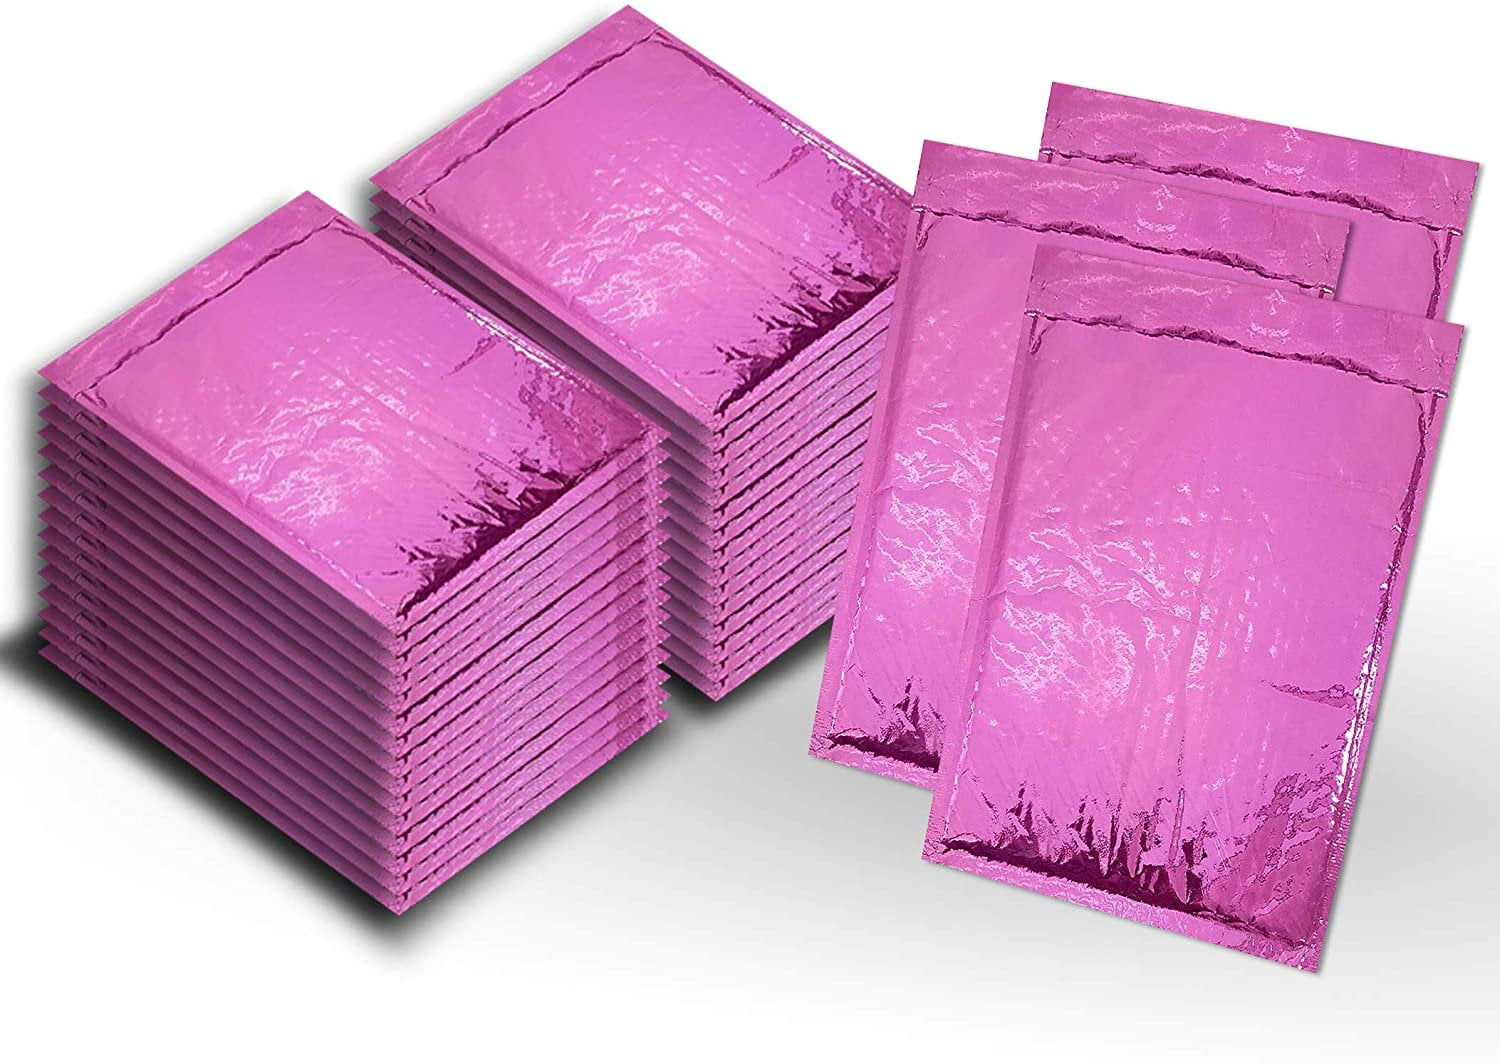 Wholesale Price. Top Quality Laminated Shipping mailers for Packing & Wrapping Packaging in Bulk Padded envelopes 5 x 9 Hot Pink Cushion envelopes Peel and Seal 25 Pack Poly Bubble mailers 5x9 